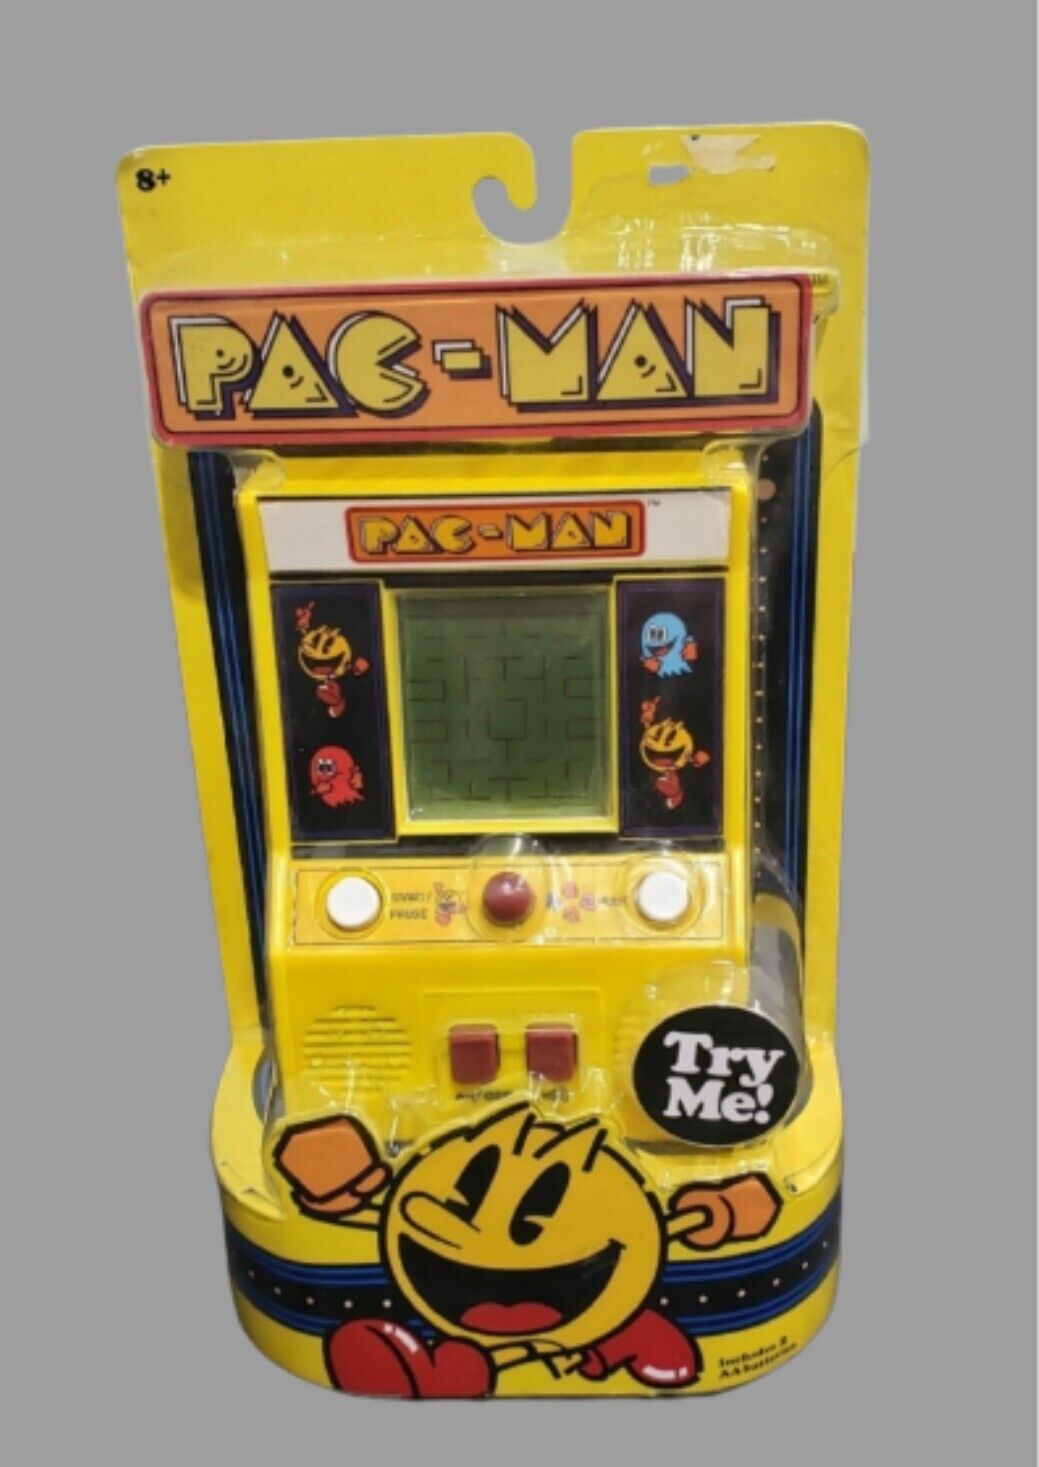 PAC-MAN Classic Arcade Handheld Gameplay LCD Display 2 Play Modes New in Box